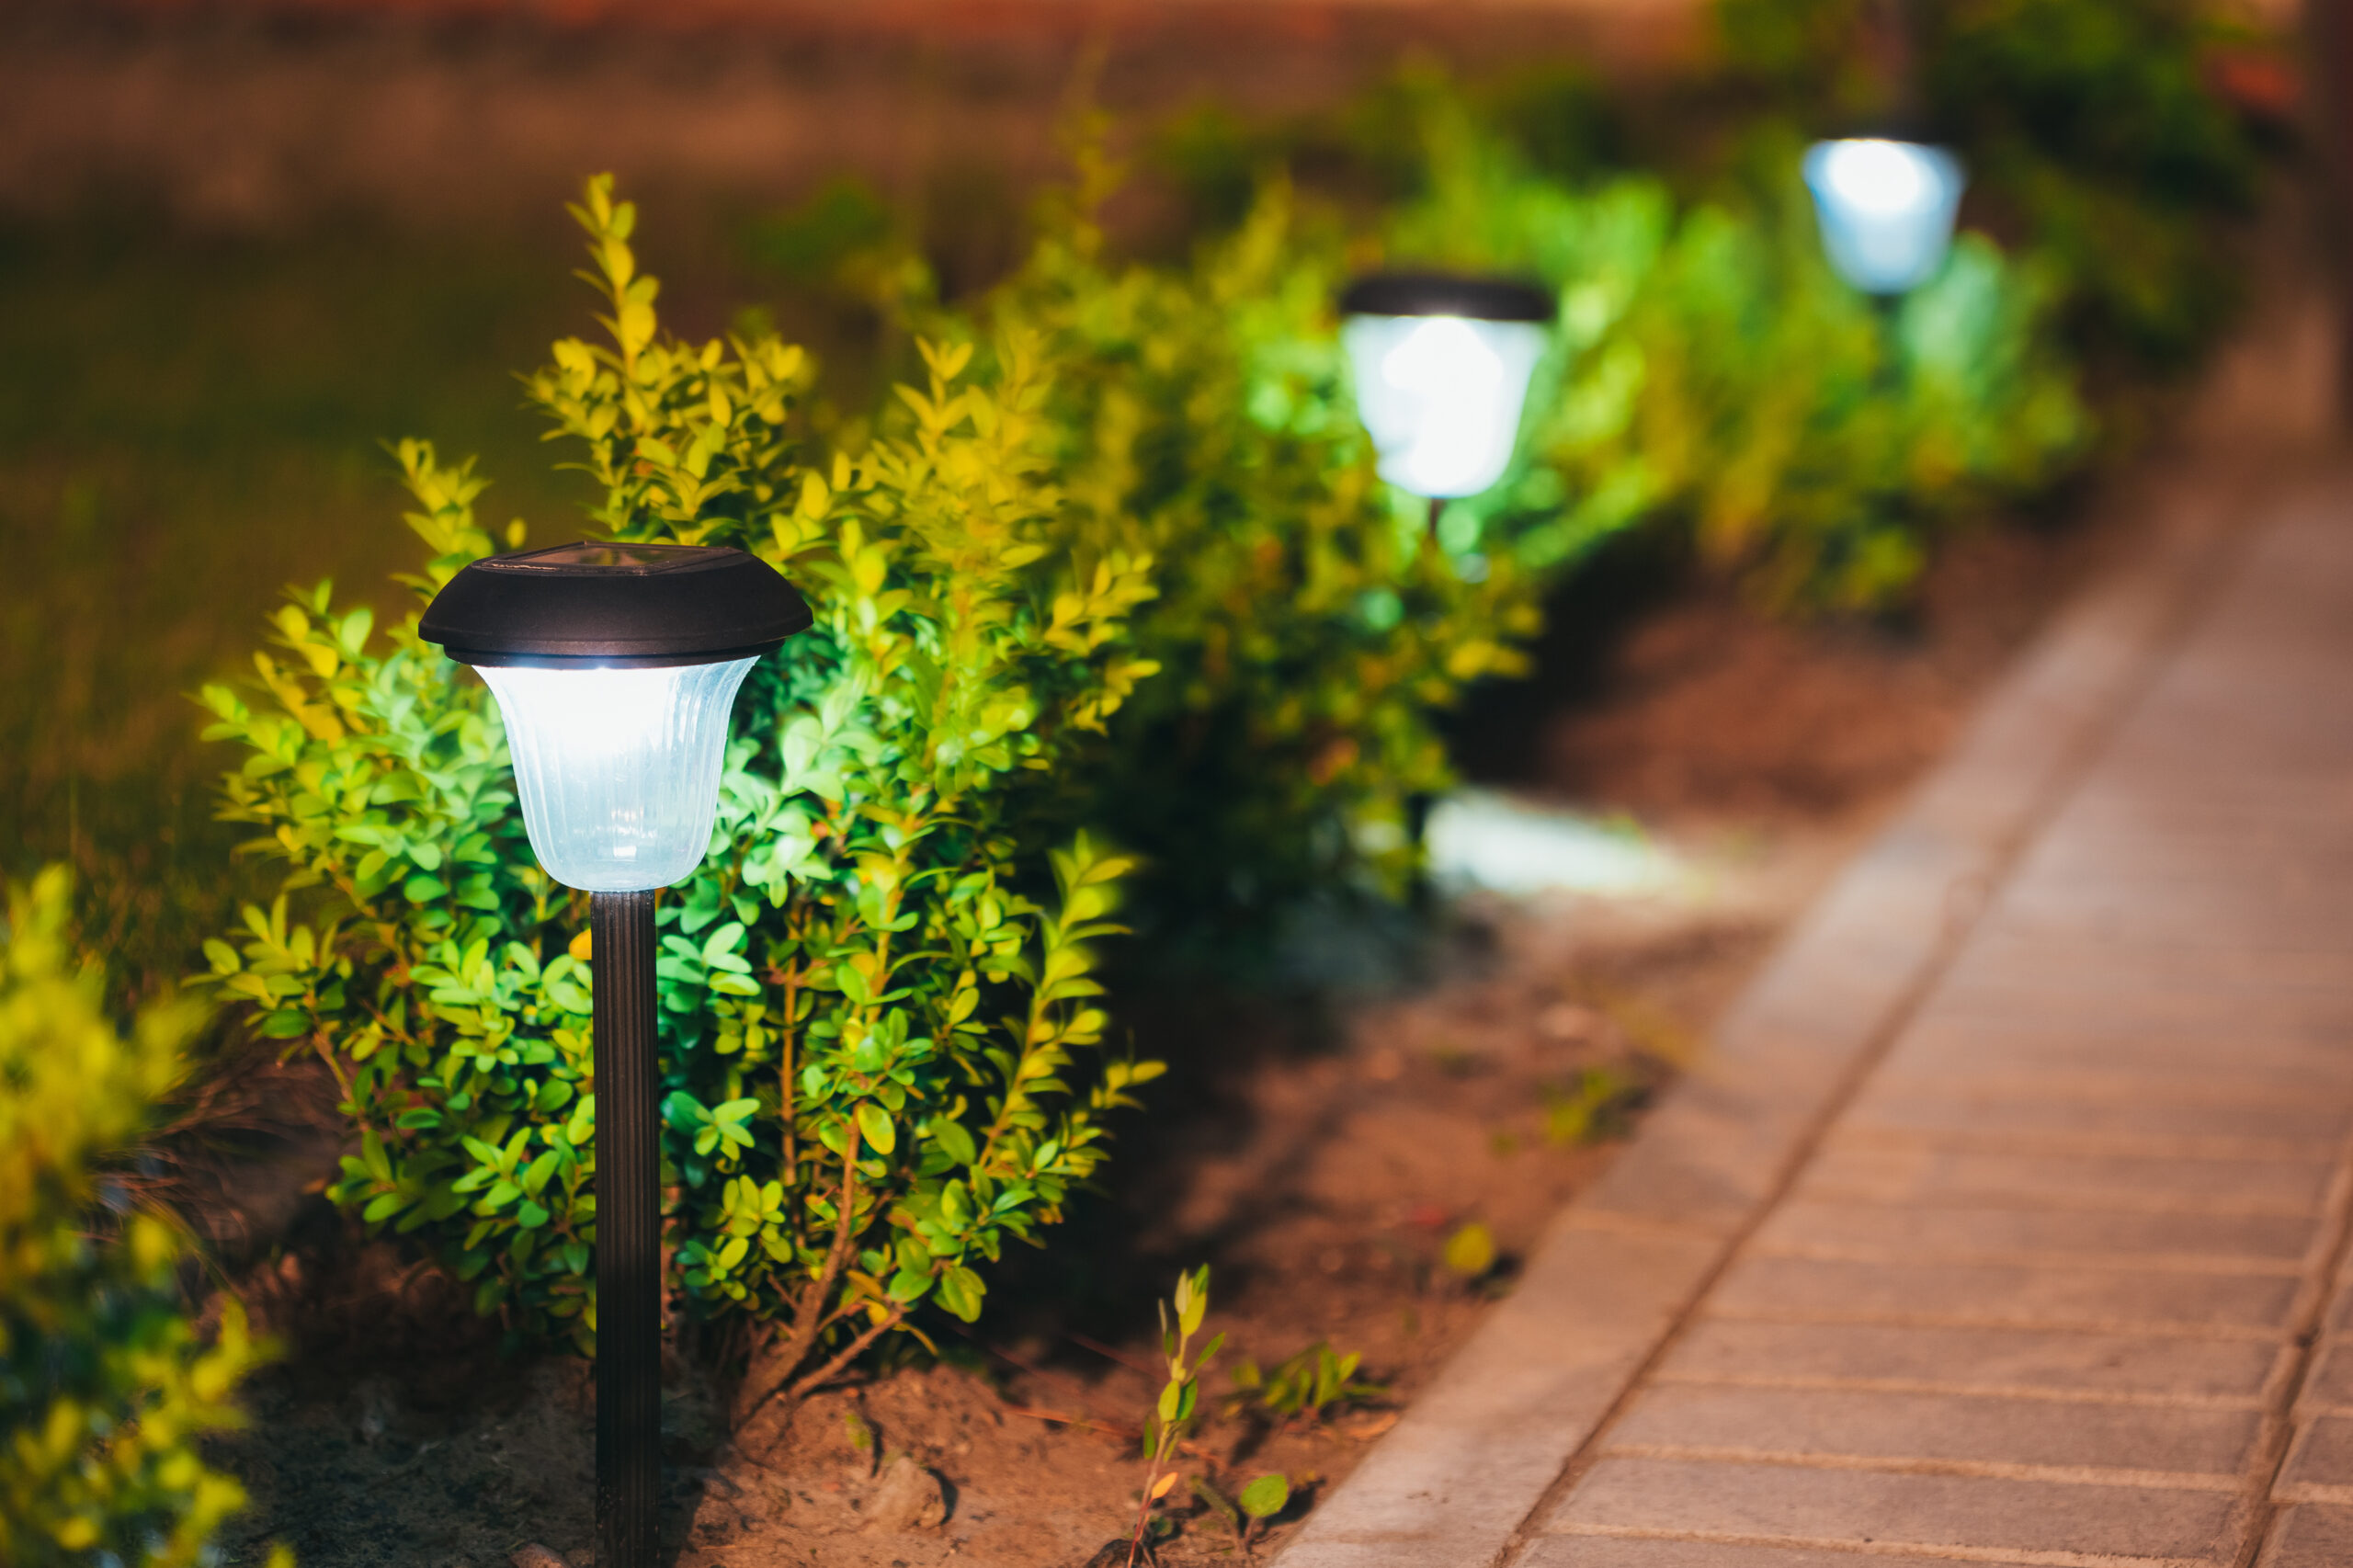 Should you install solar landscape lighting in Tennessee